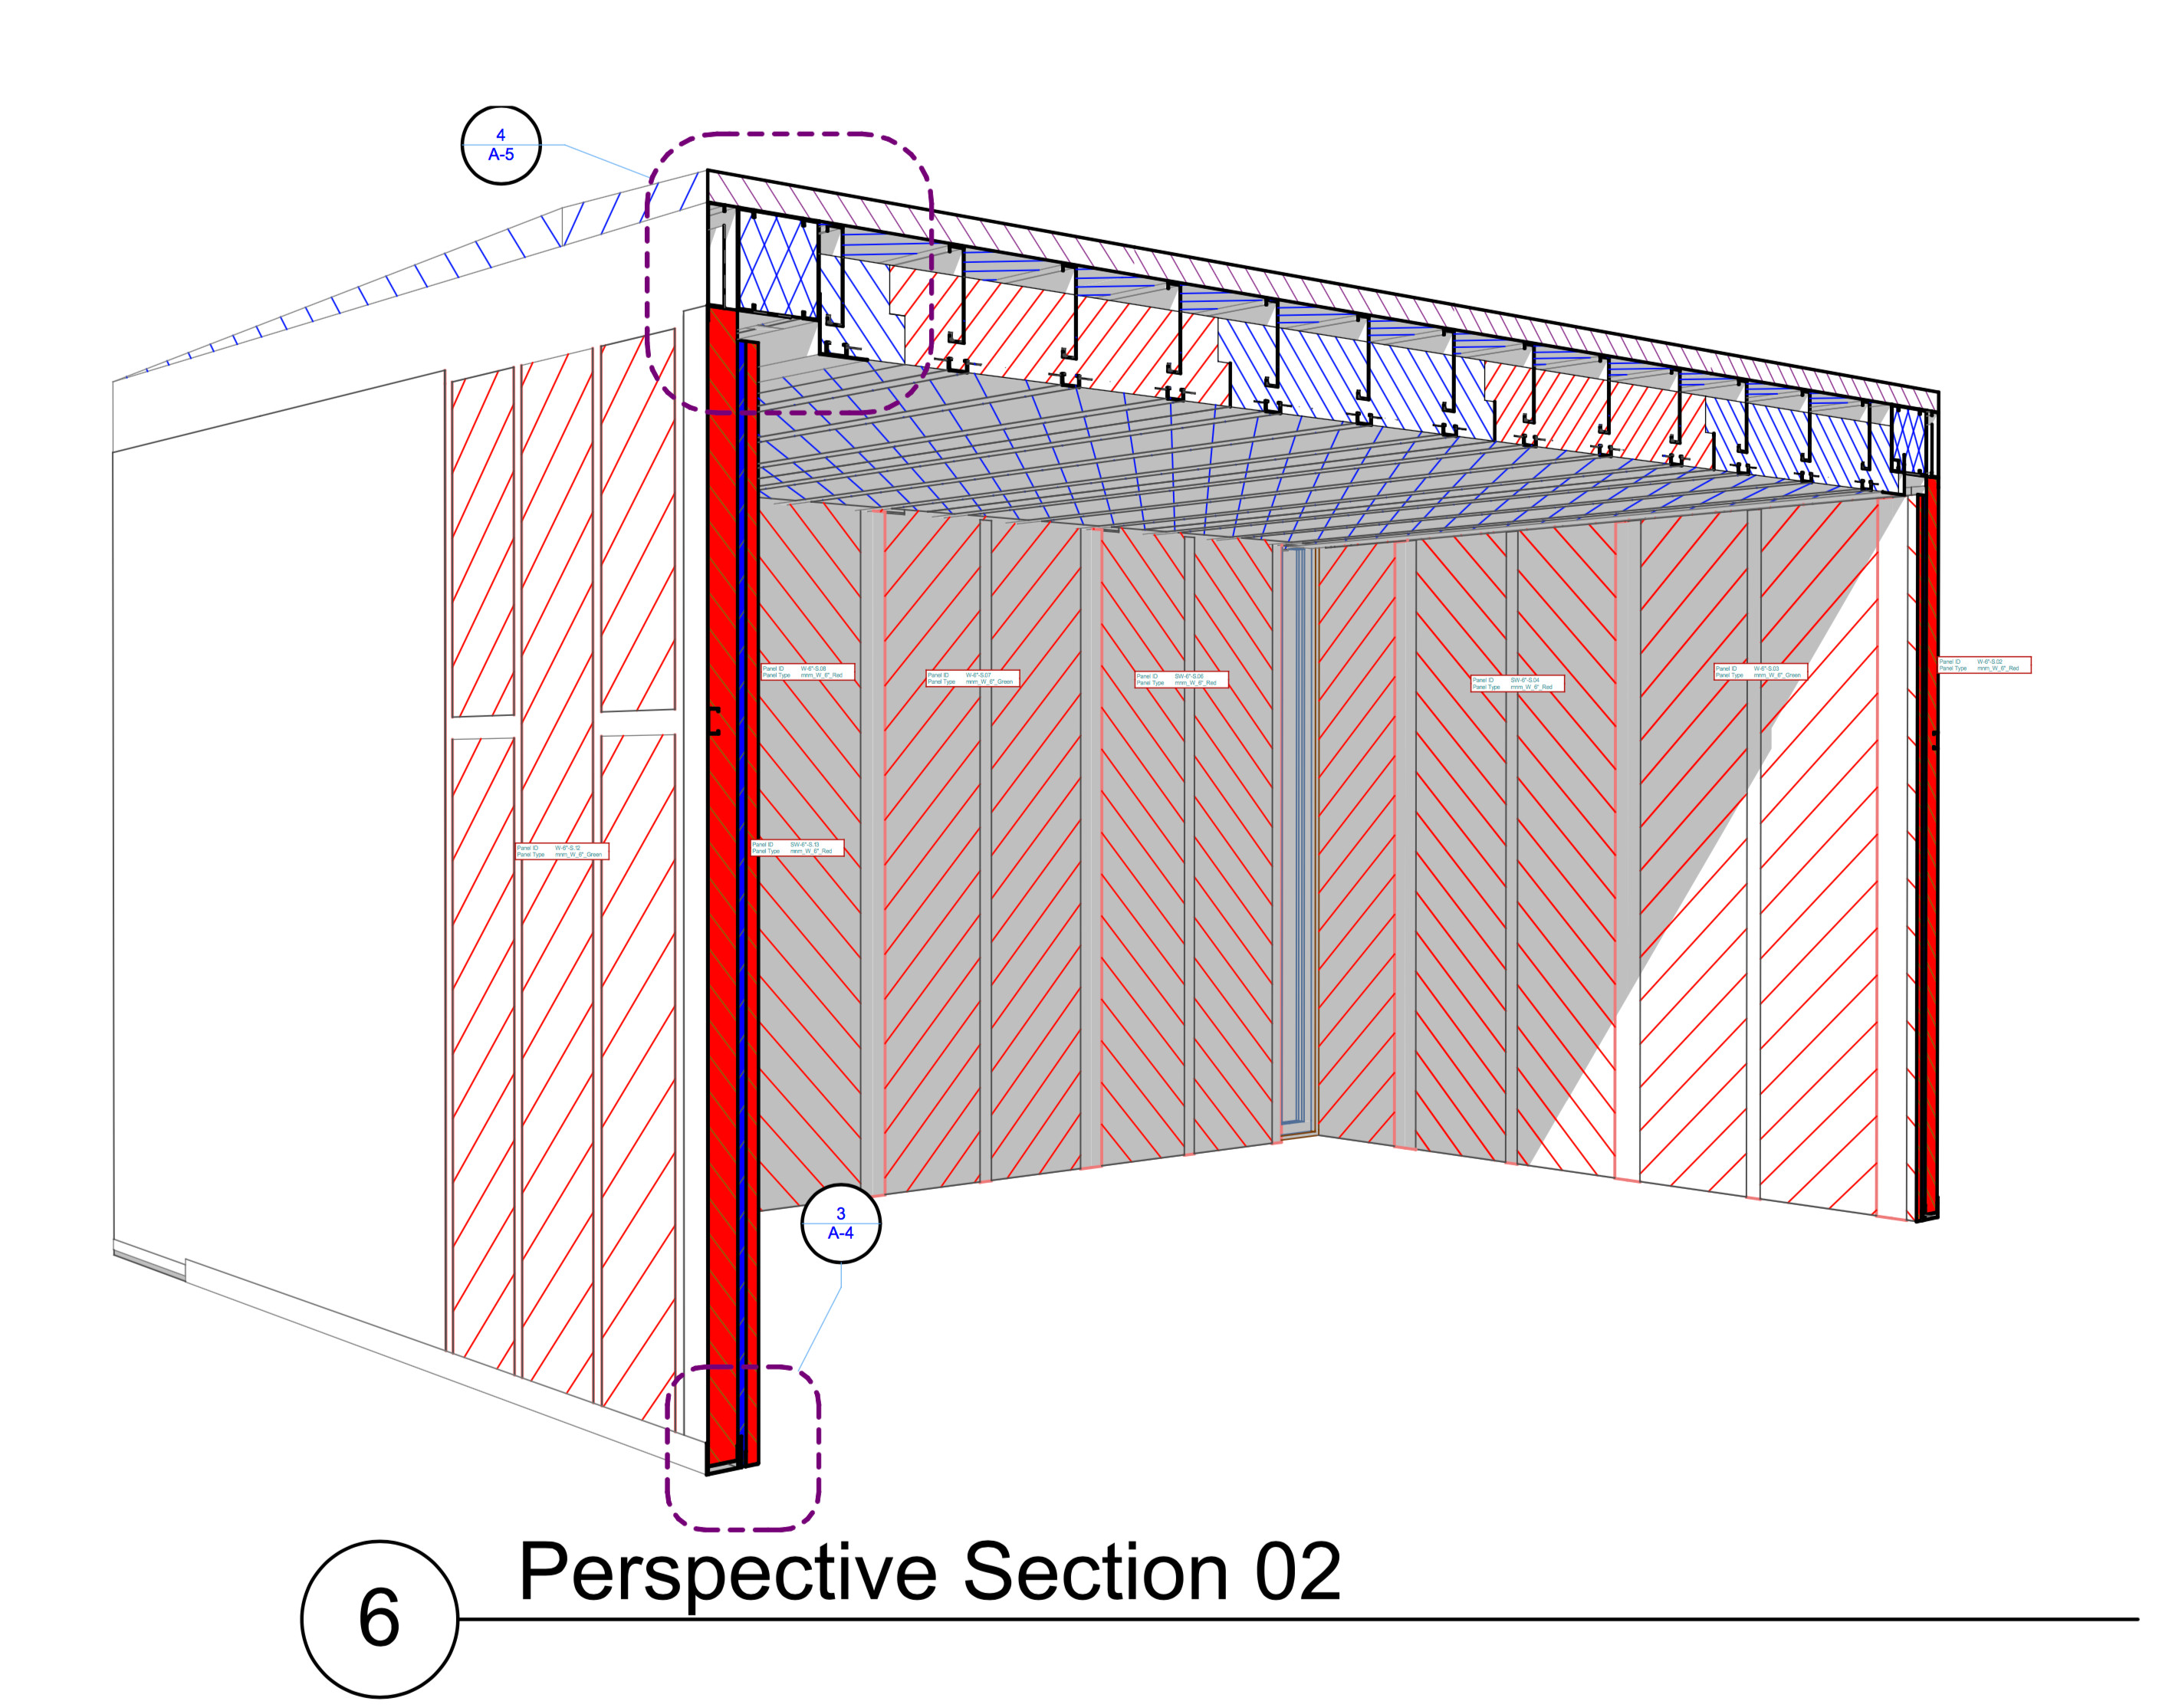 Perspective Section of shed overall, with wall-section level detail in cut elements, and a detail callout for the wall-ceiling assembly connection.